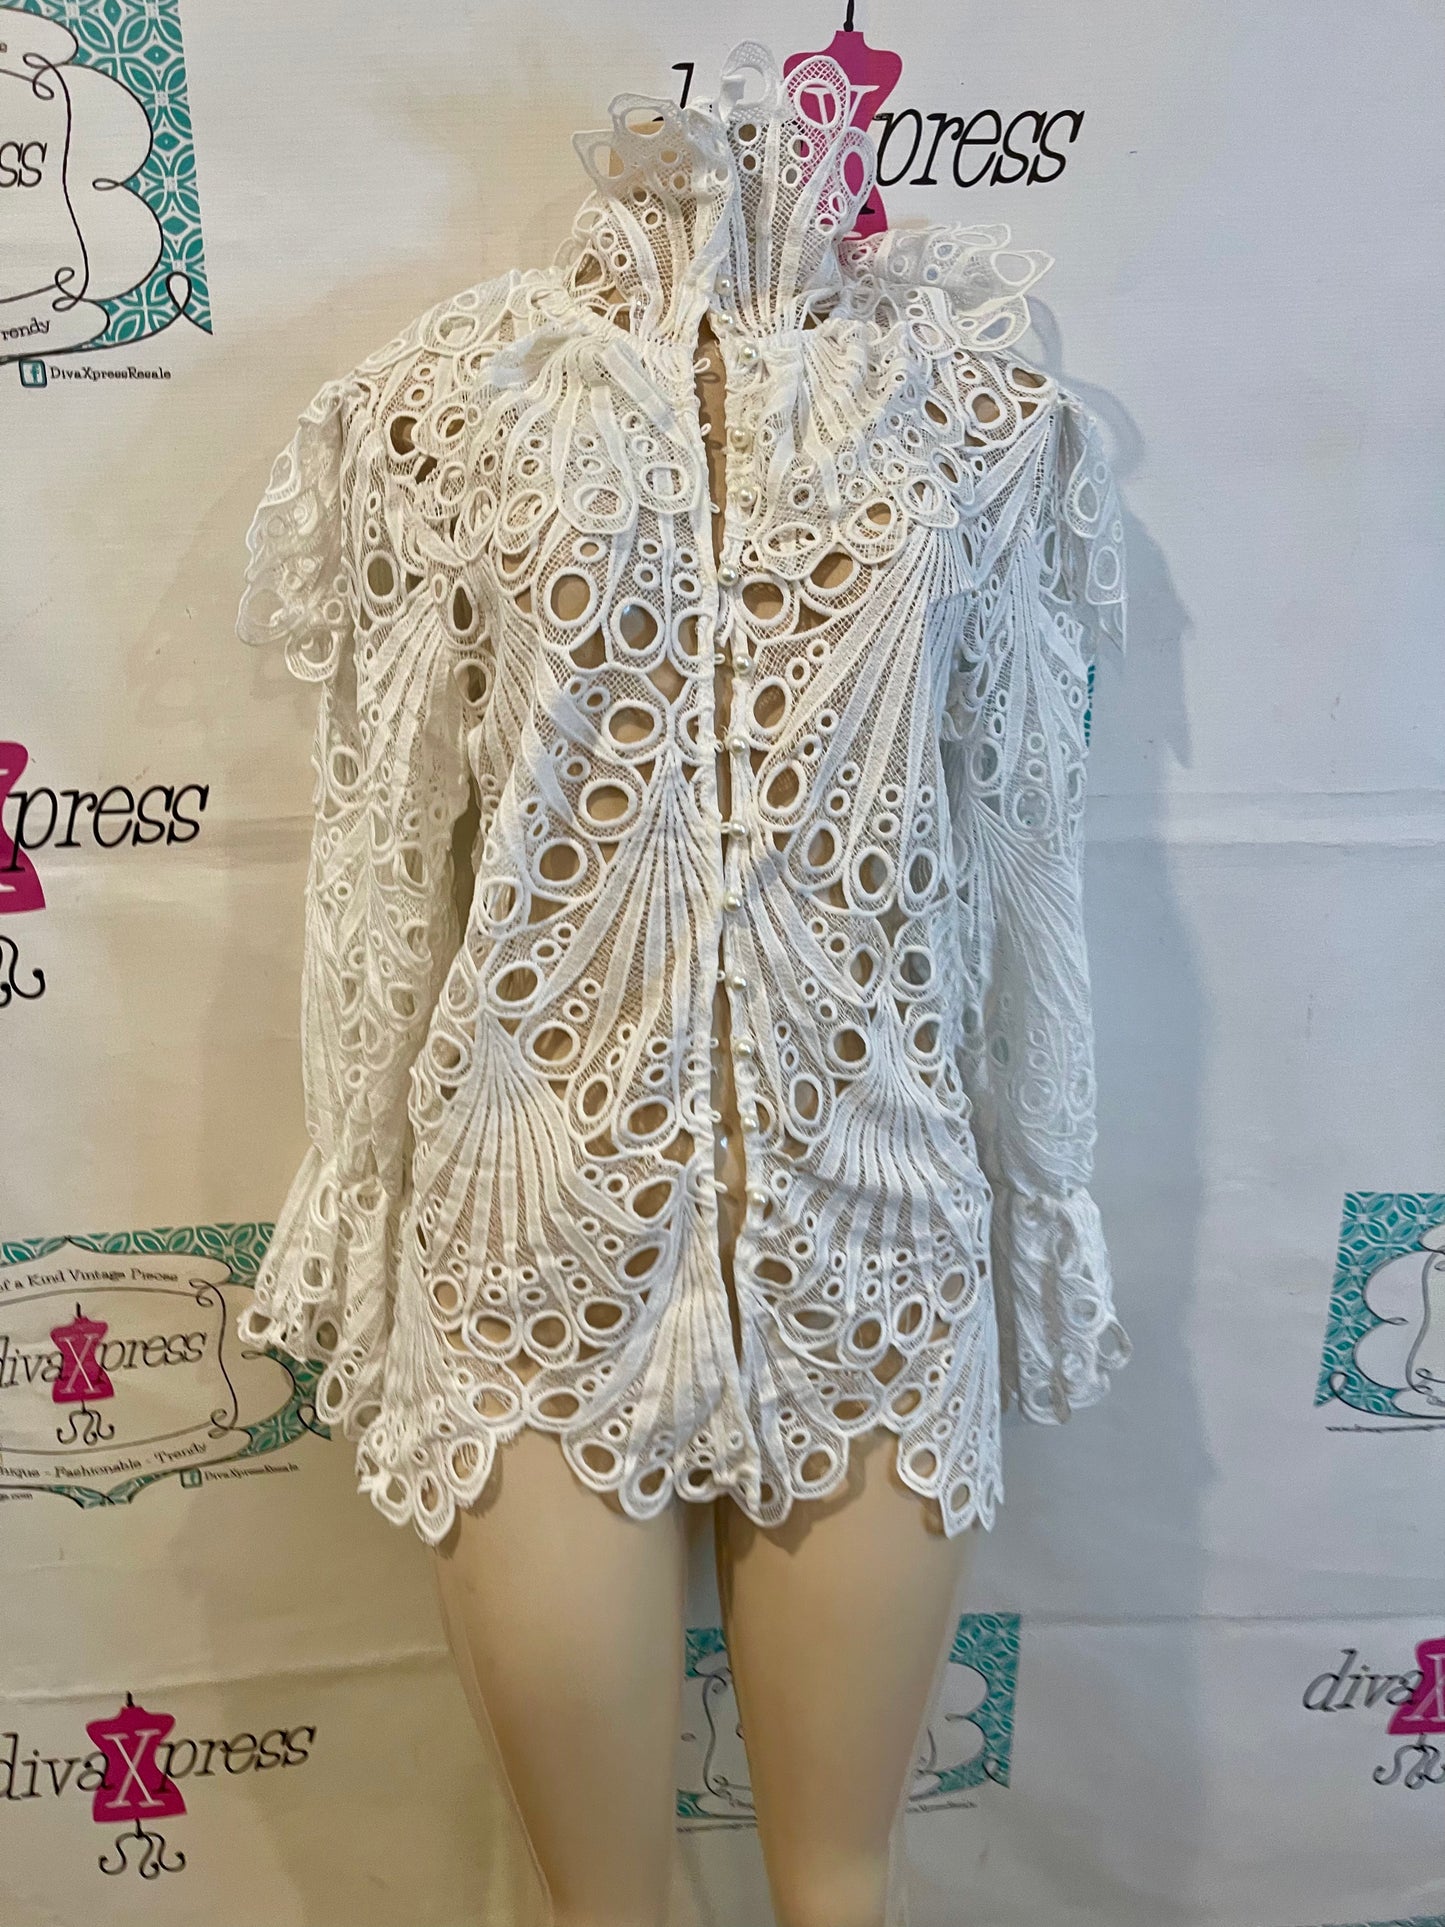 Vintage White Sheer Lace Top Size M